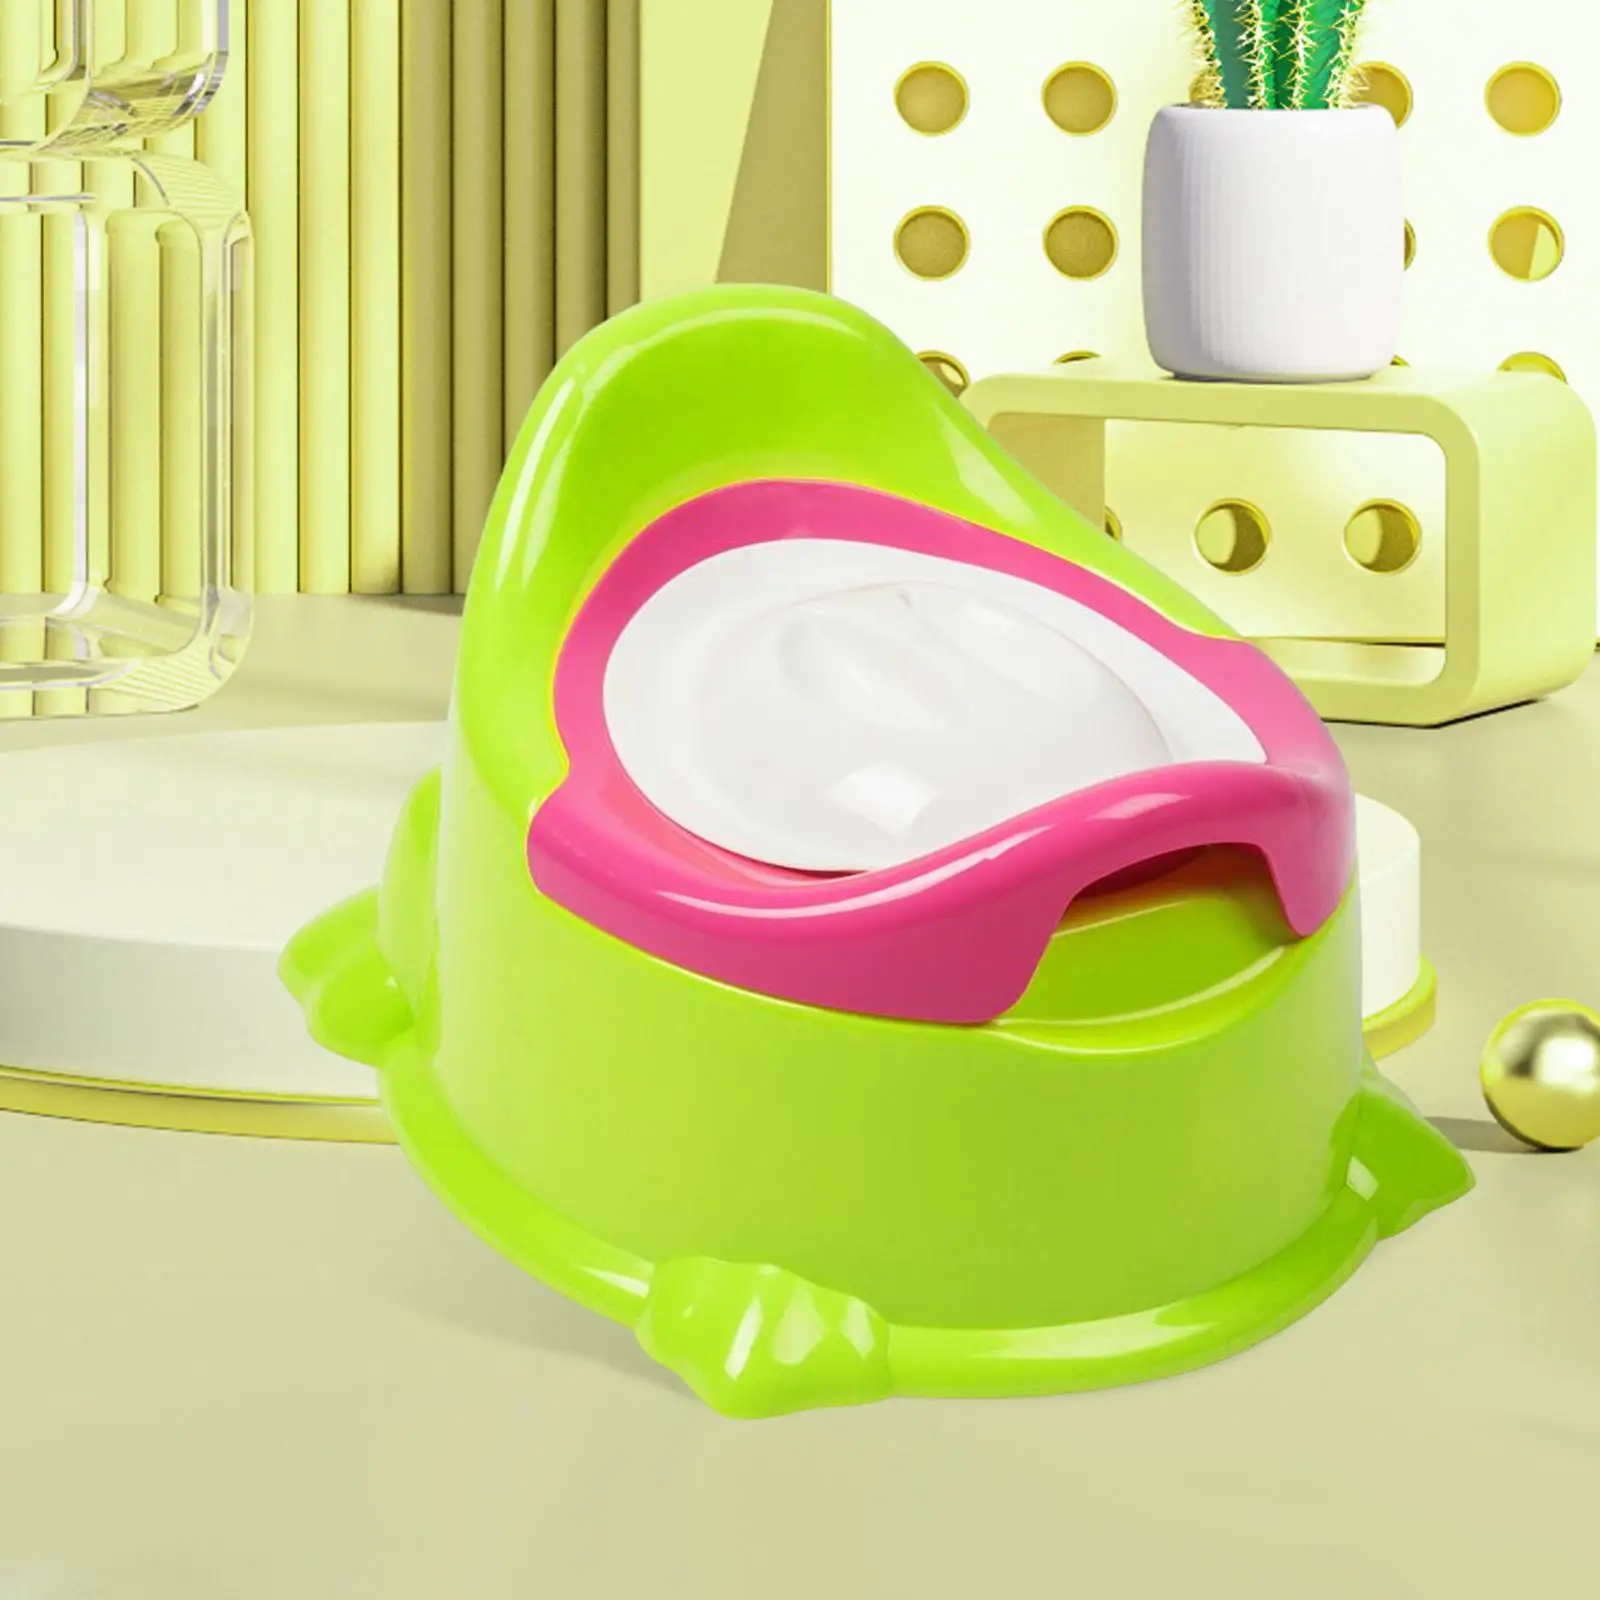 Baby Potty Chair Toilet Training Seat for Babies 6-12 Month Bedroom Home